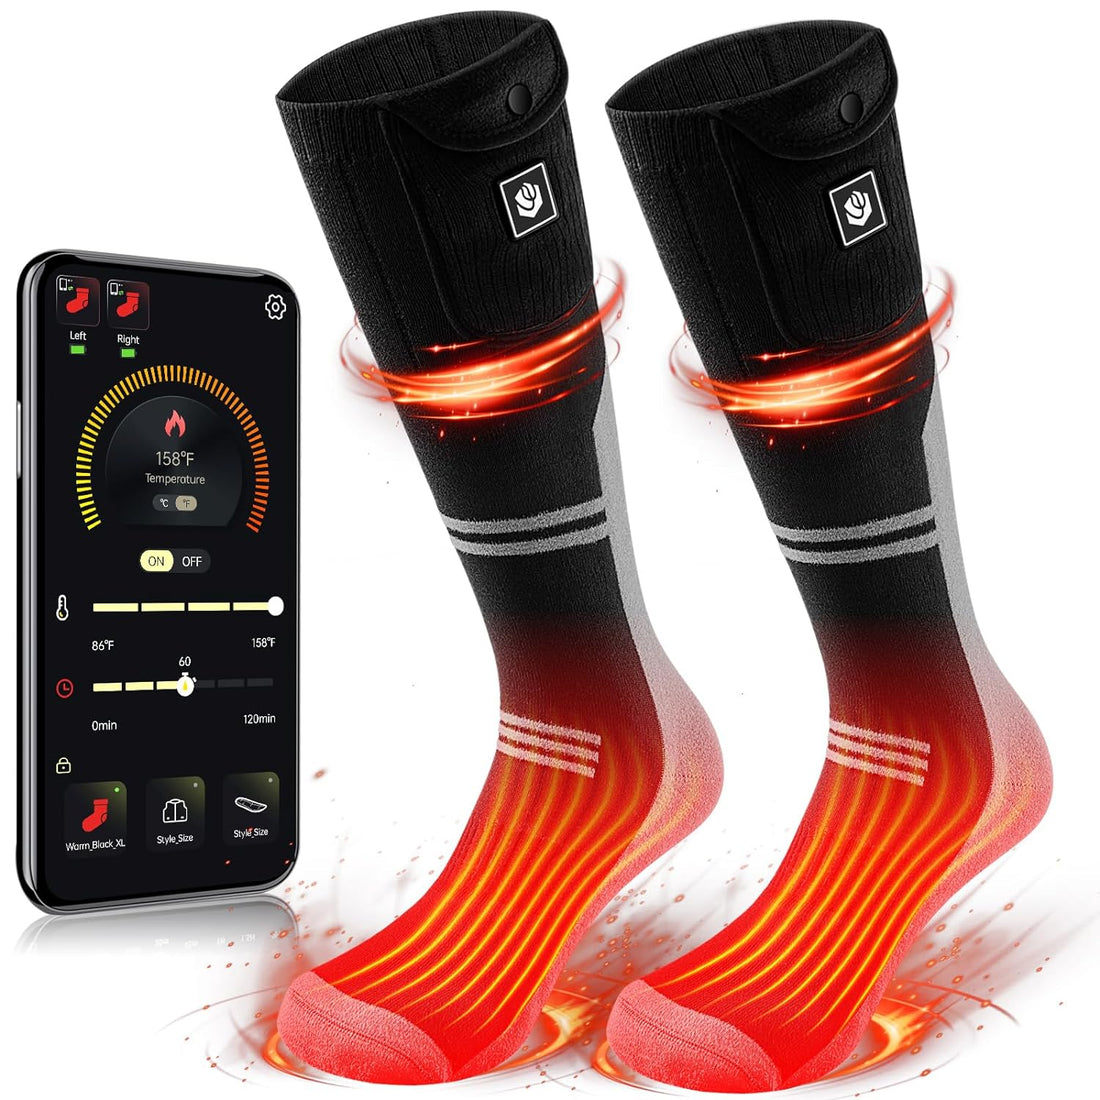 Heated Socks for Men Women Rechargeable Washable APP Remote Control 7.4V Battery Electric Heating Socks for Hunting Ice Fishing Camping Hiking Skiing Outdoor Work（Black, XL）